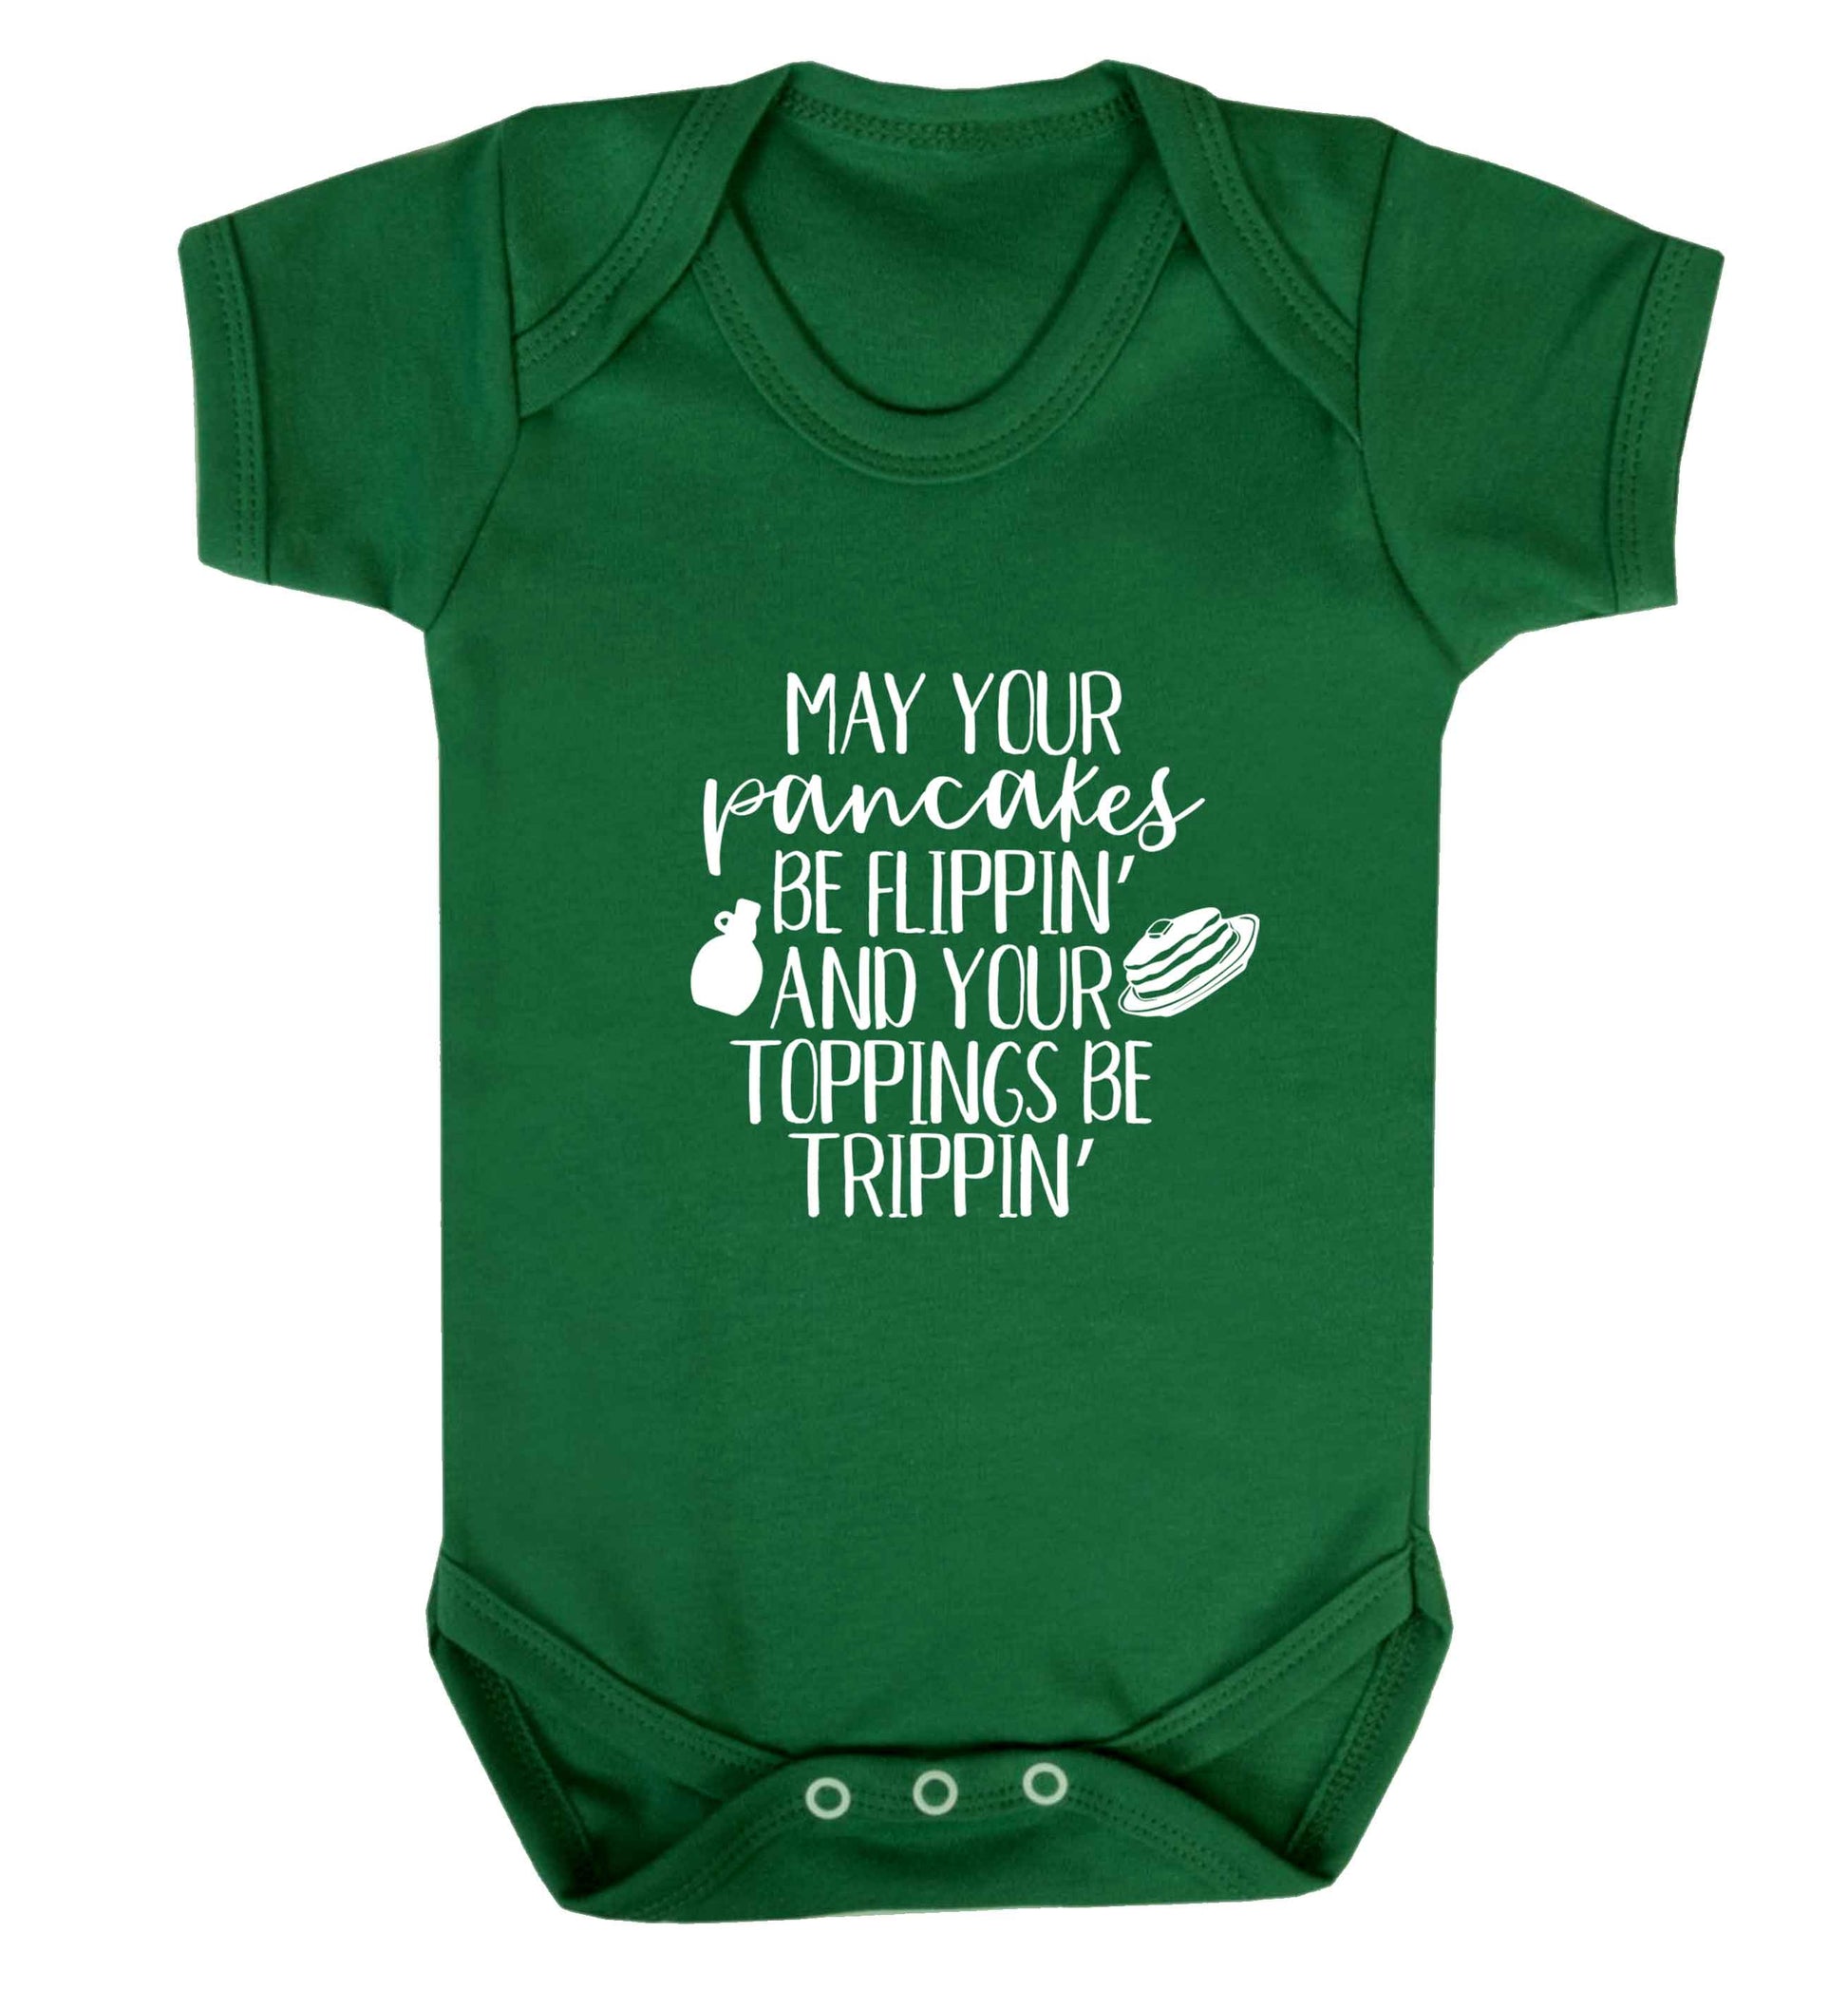 May your pancakes be flippin' and your toppings be trippin' baby vest green 18-24 months